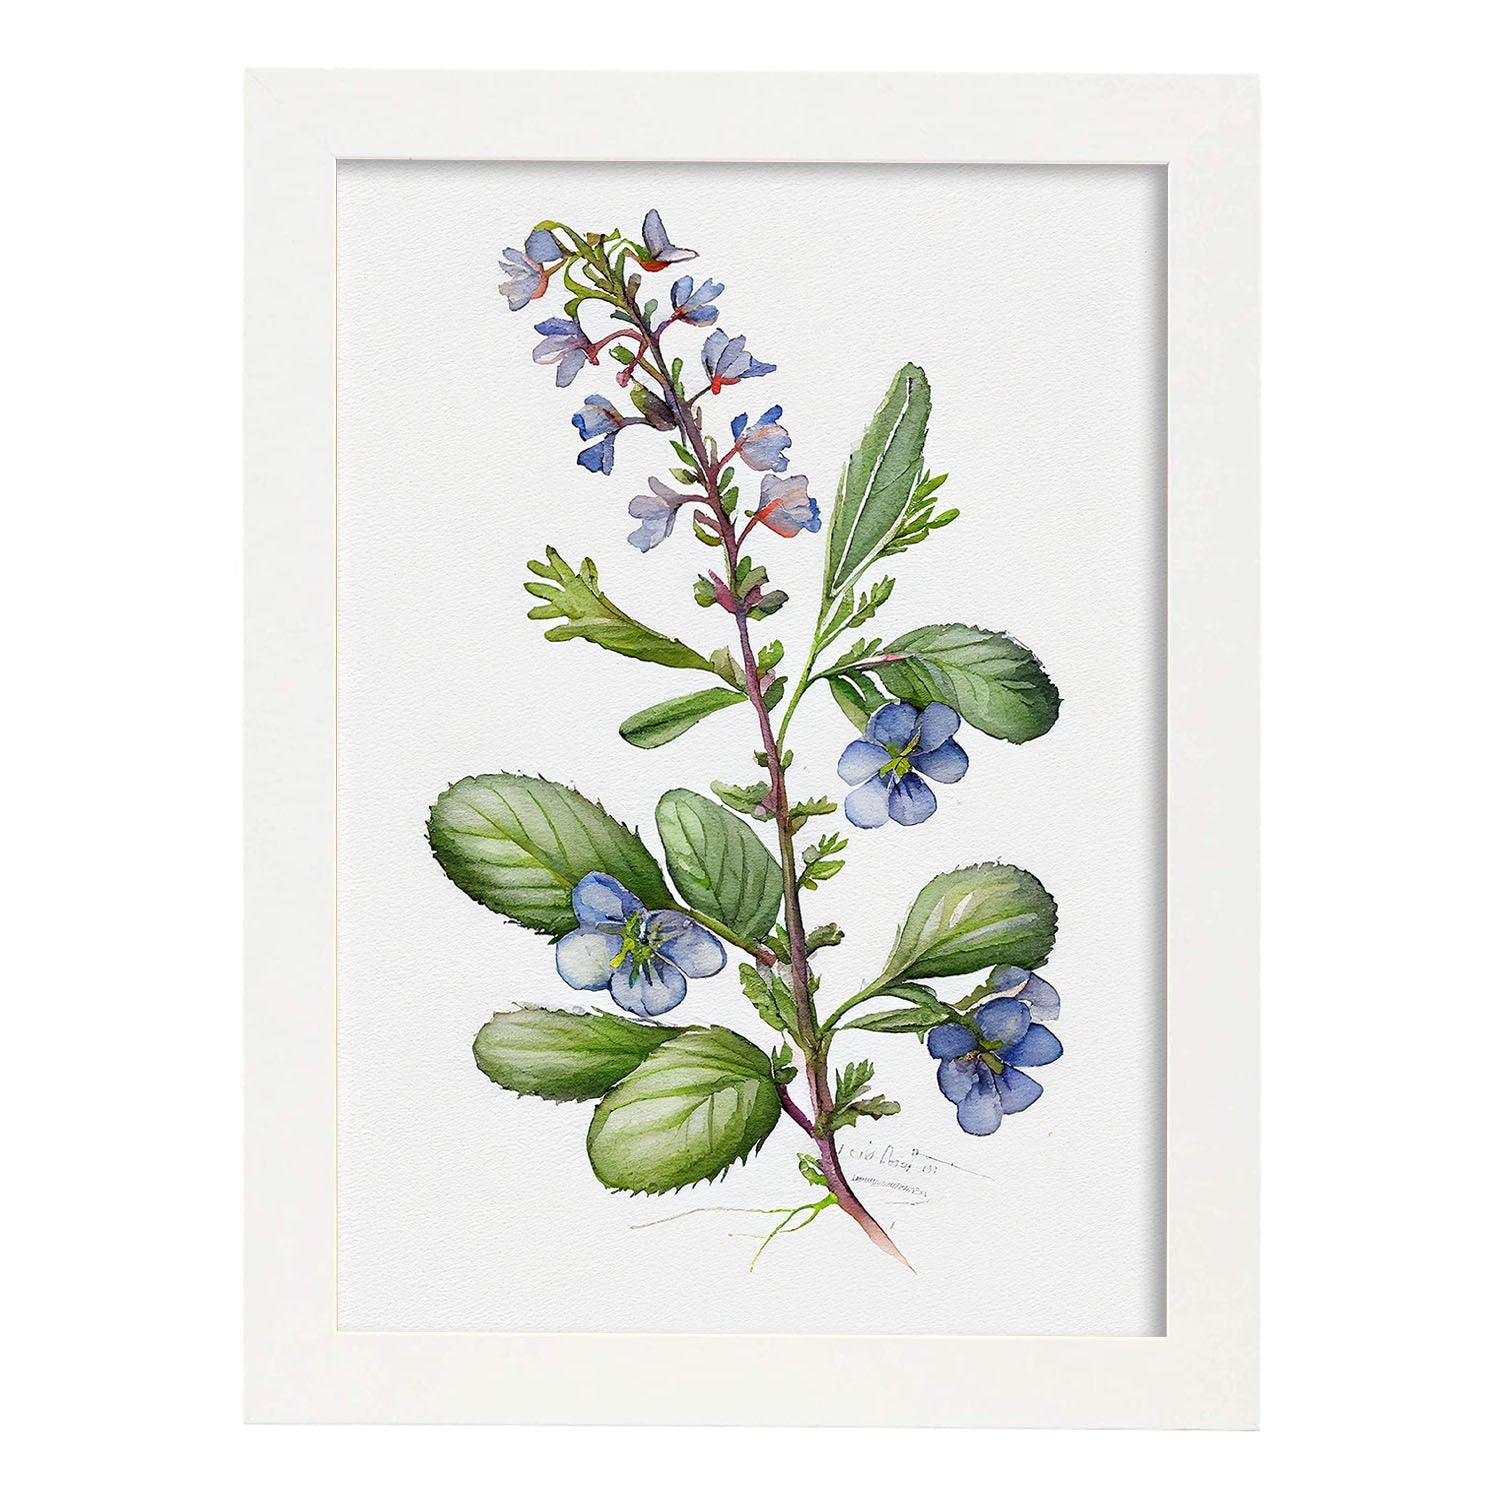 Nacnic watercolor minmal Speedwell_4. Aesthetic Wall Art Prints for Bedroom or Living Room Design.-Artwork-Nacnic-A4-Marco Blanco-Nacnic Estudio SL